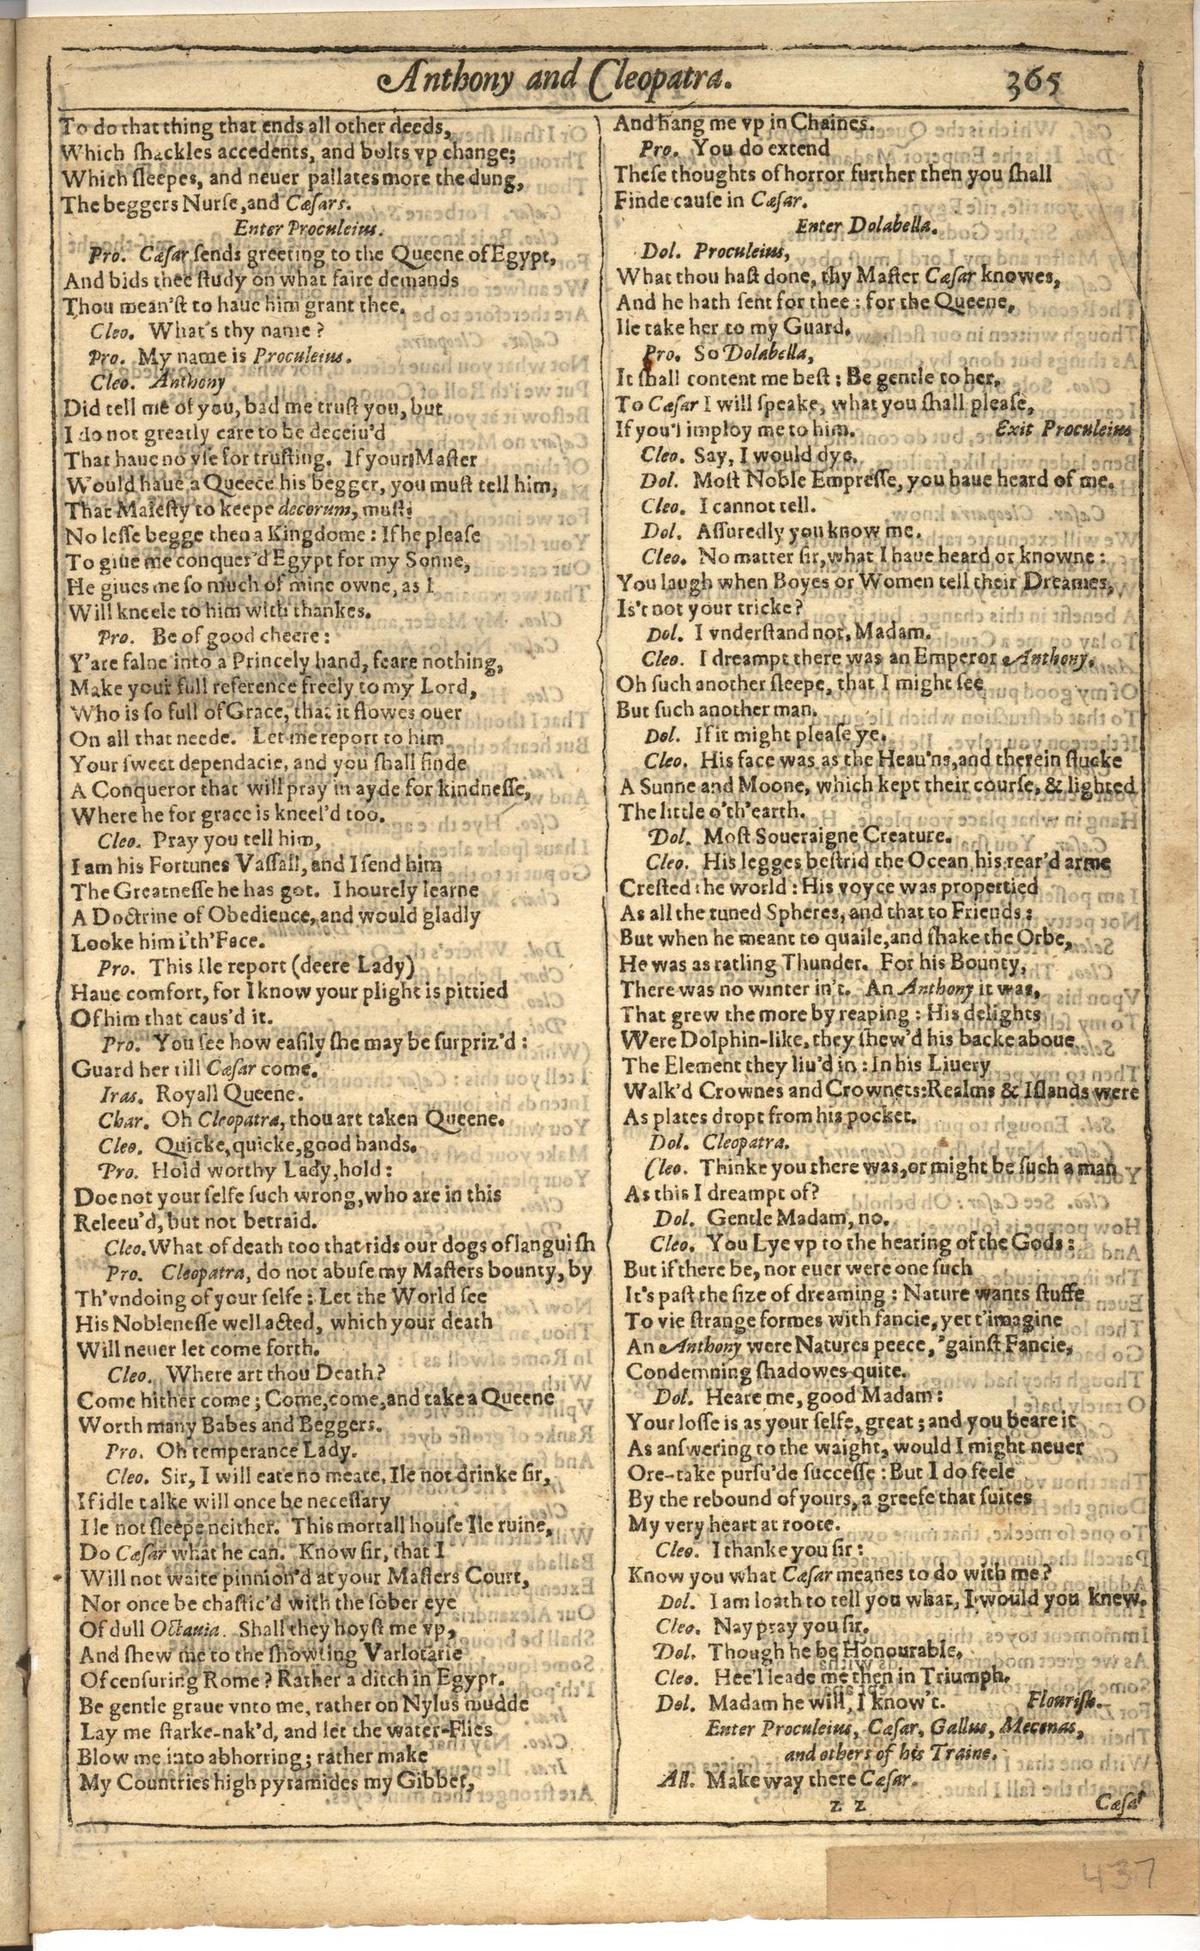 Image of page 873